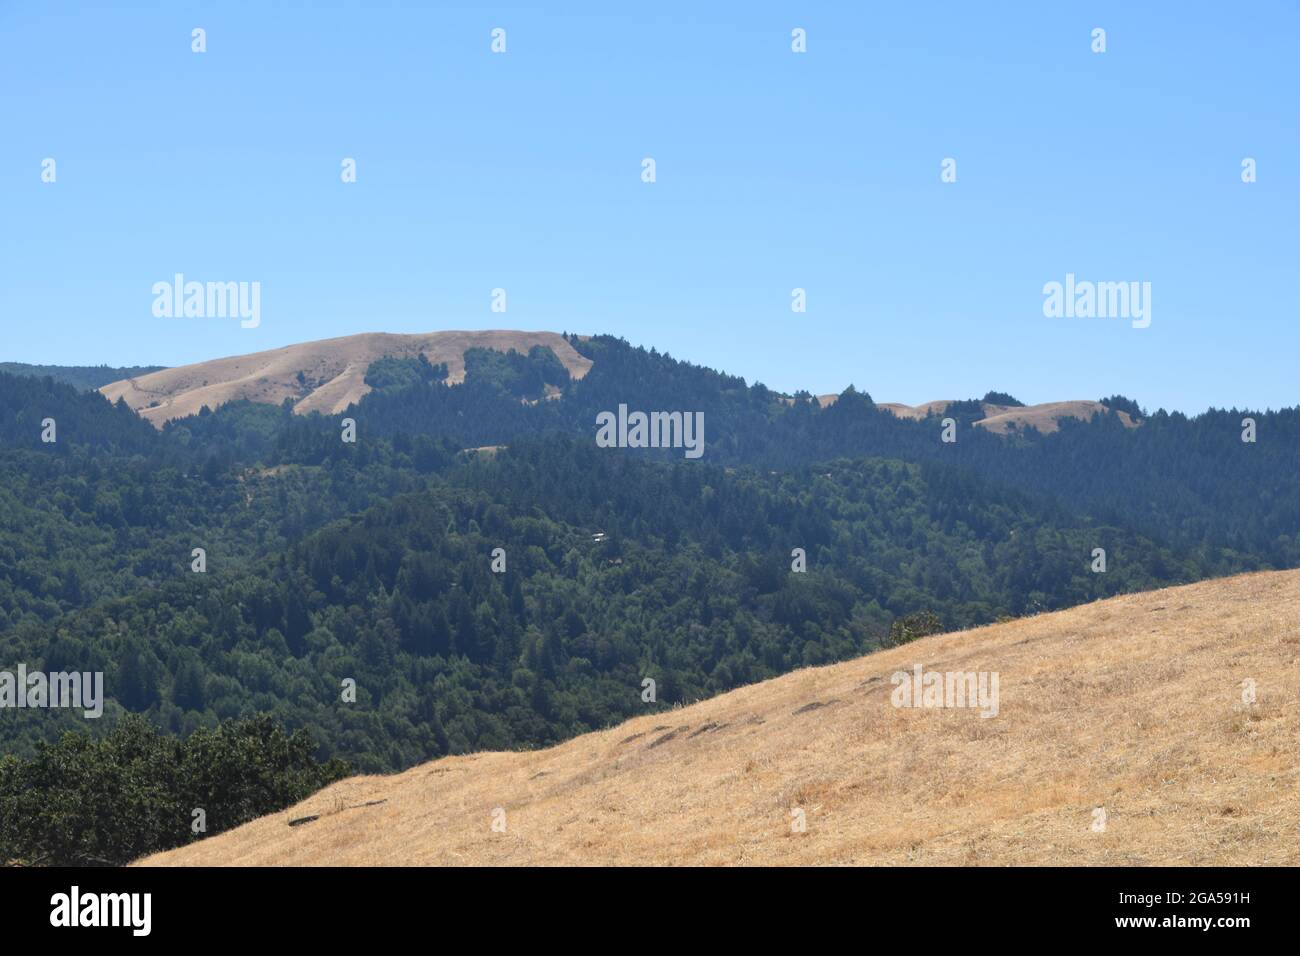 A view of the scenery in Marin County, California Stock Photo